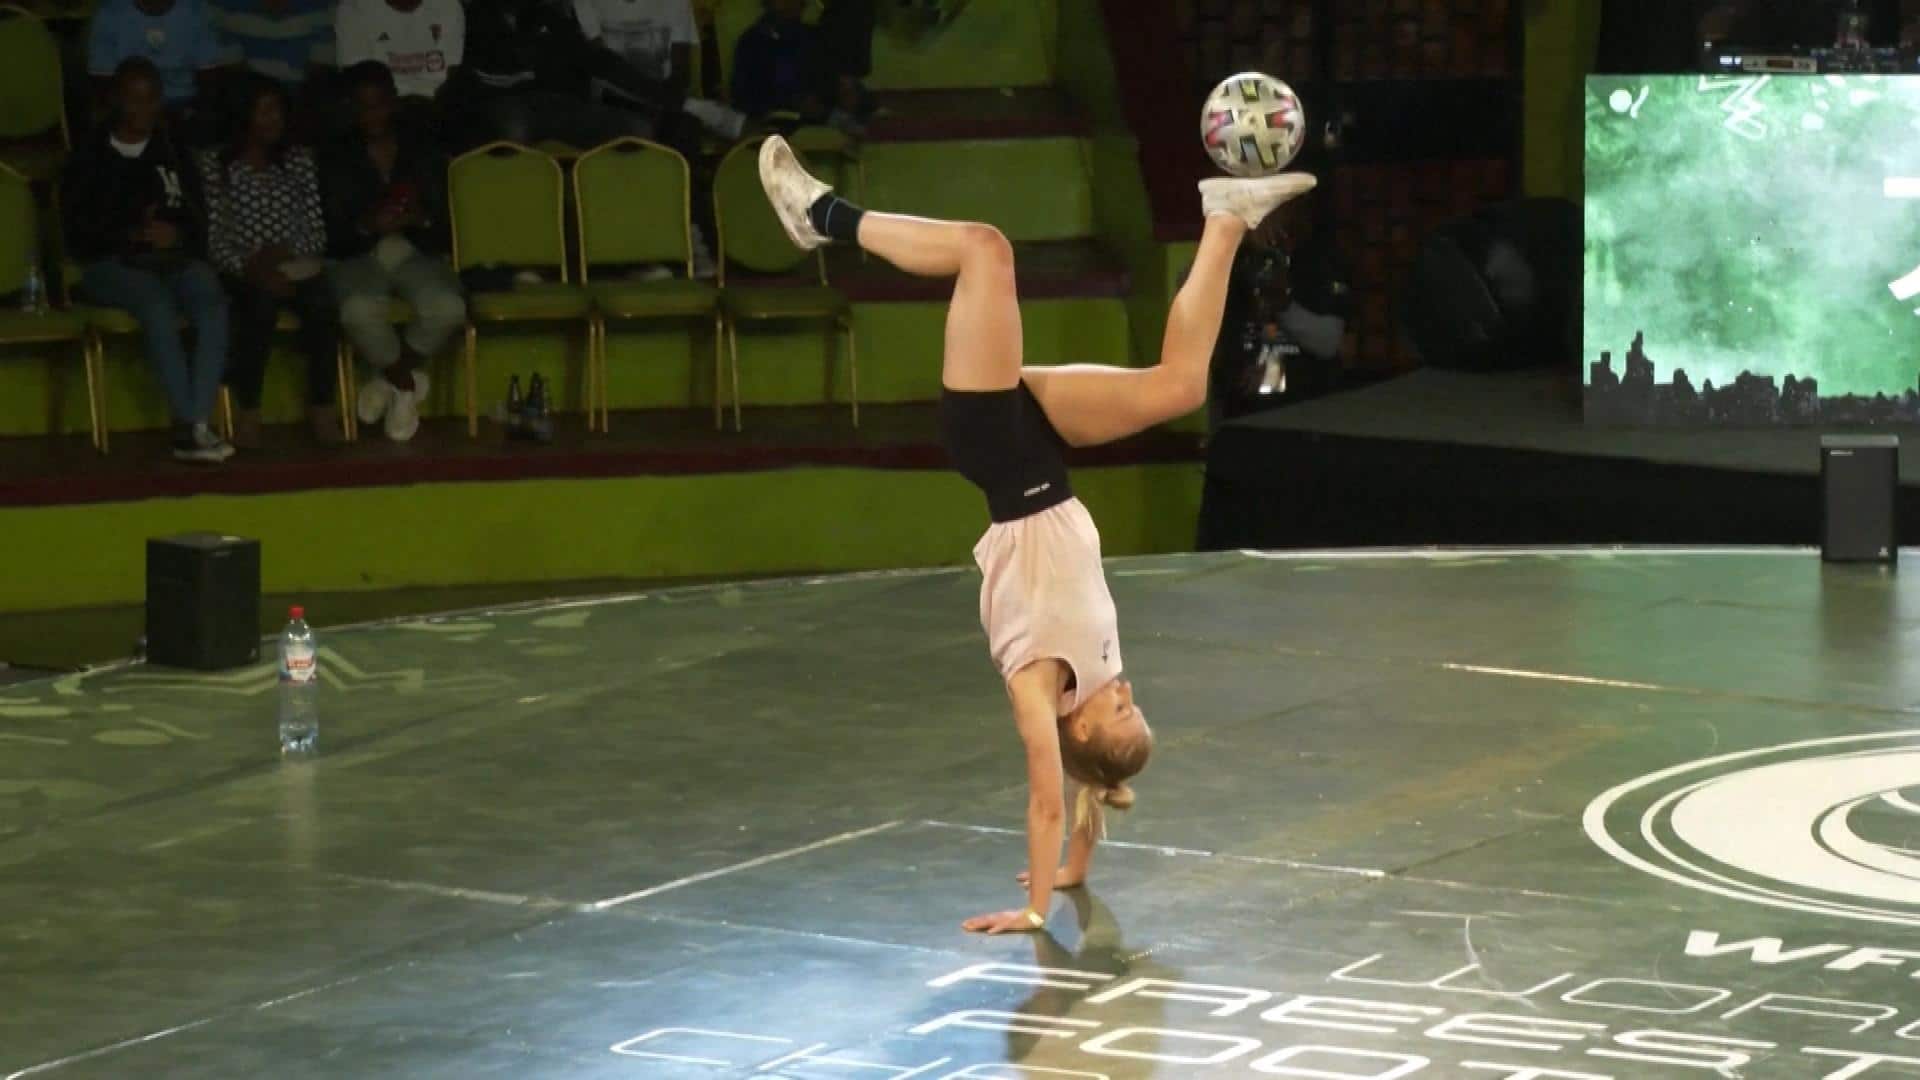 Going head to head (and foot to foot) in world freestyle football championship